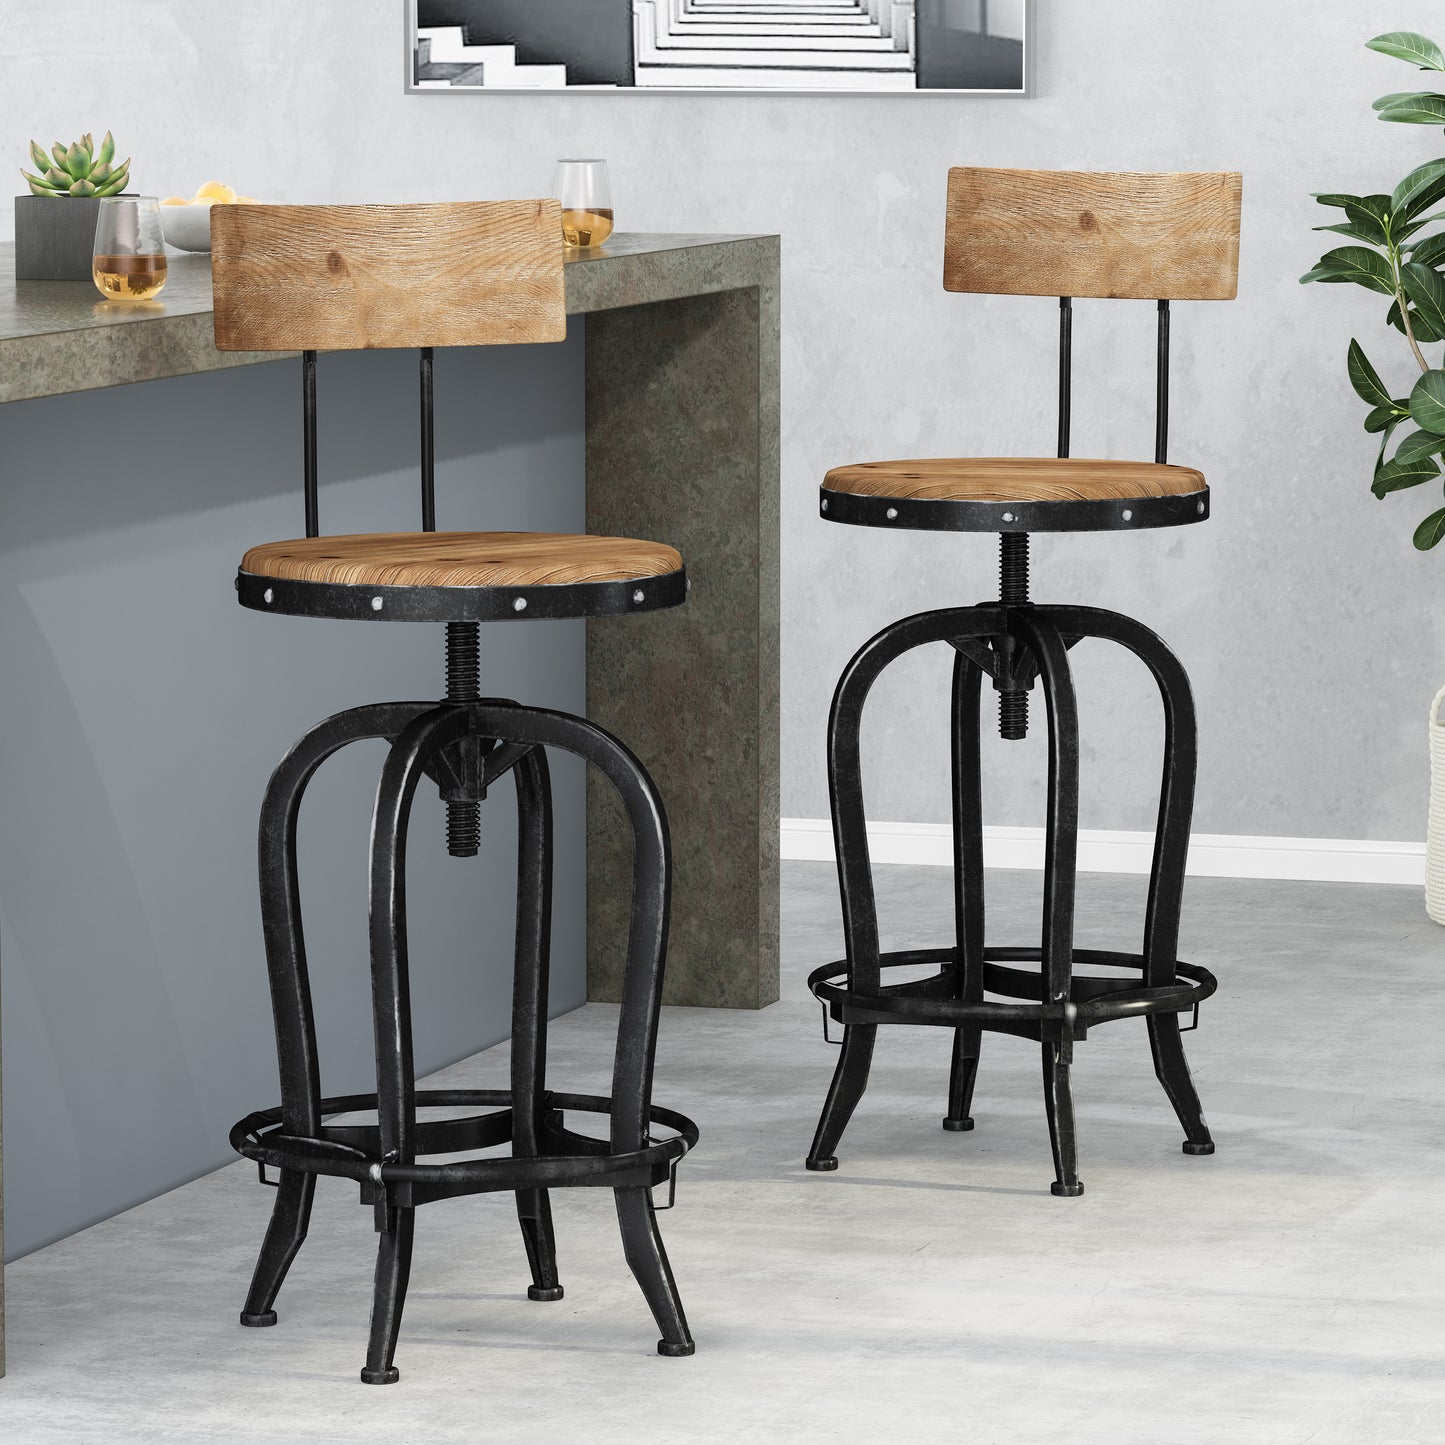 Pineview Modern Industrial Firwood Adjustable Height Swivel Barstools, Set of 2, Natural and Black Brushed Silver